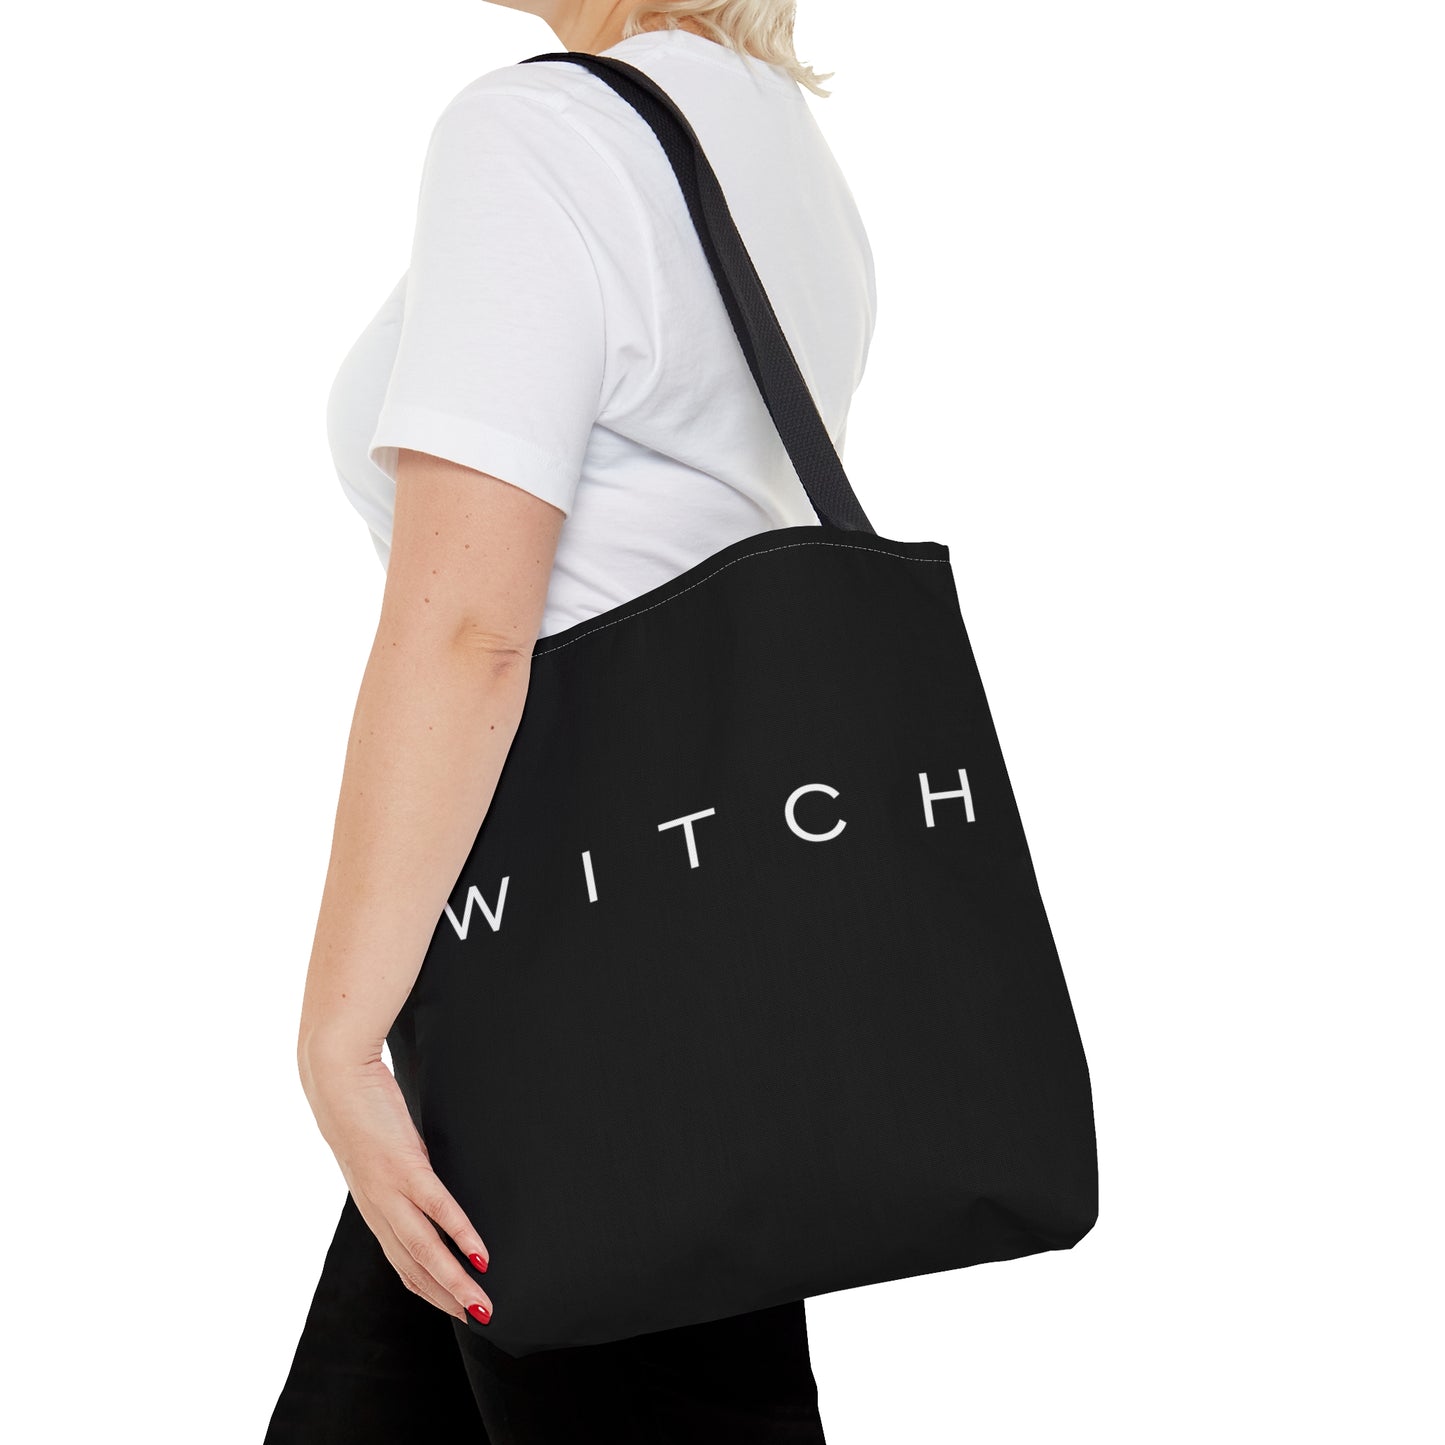 Black WITCH tote - Protection